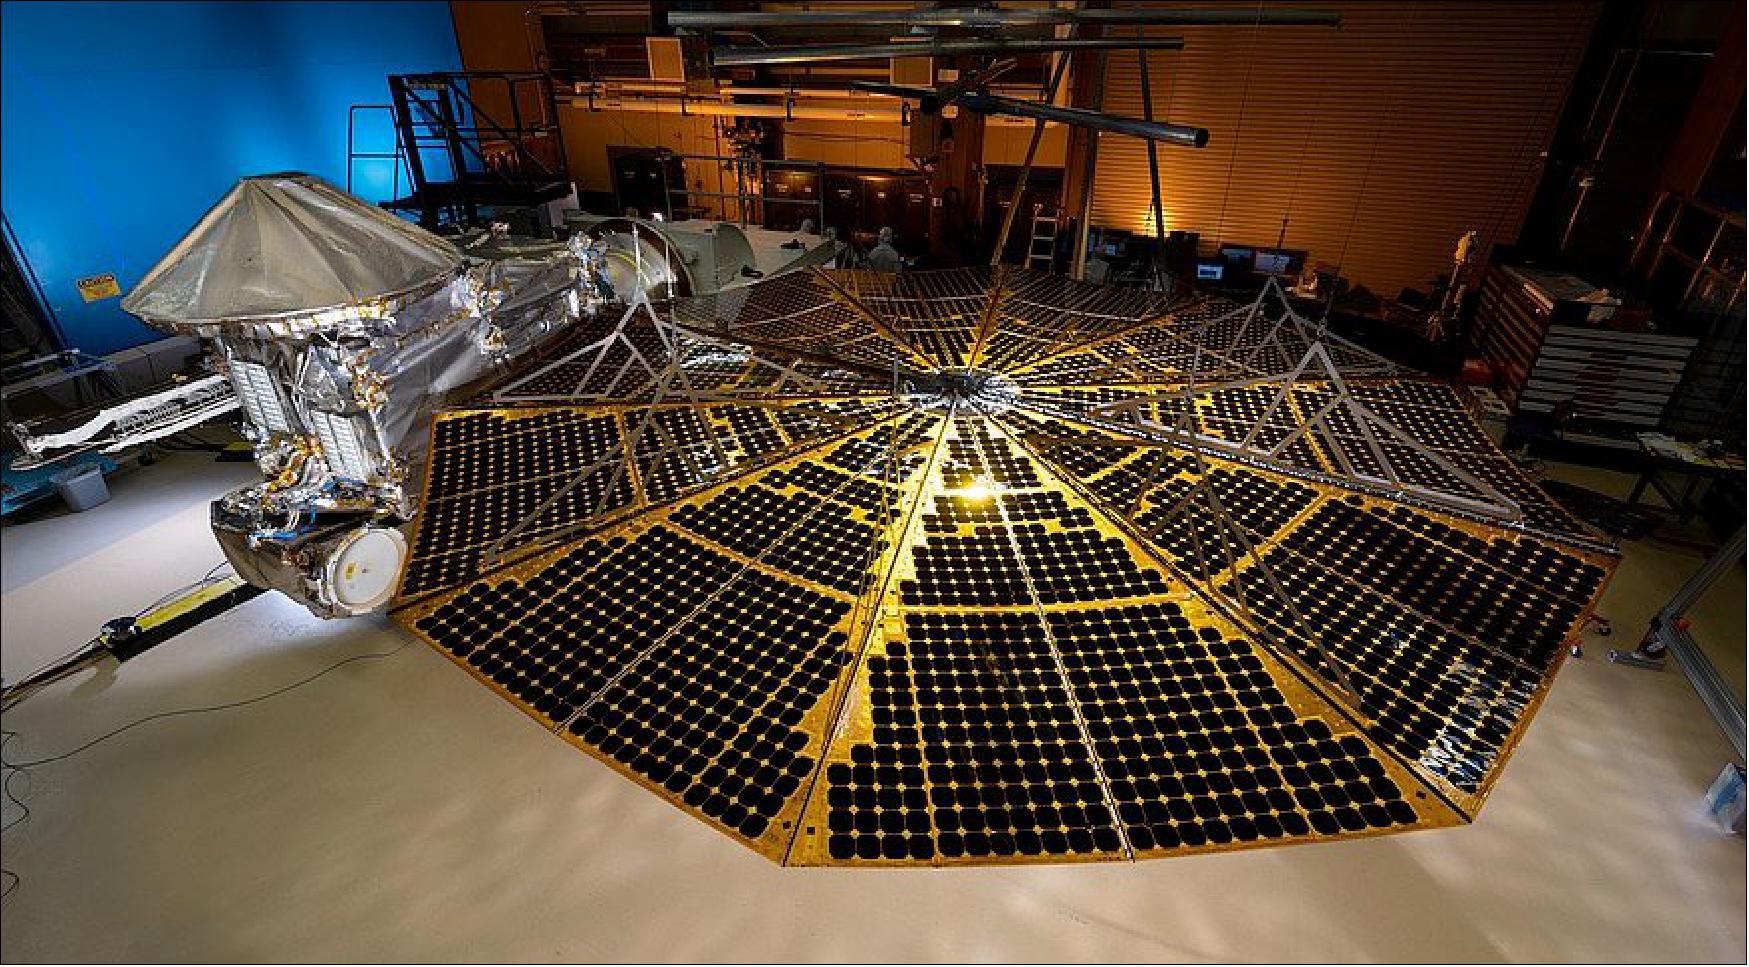 Figure 29: The Lucy spacecraft and one of its two solar arrays, 7.3 m in diameter, during tests before its Oct. 16 launch (image credit: Lockheed Martin)